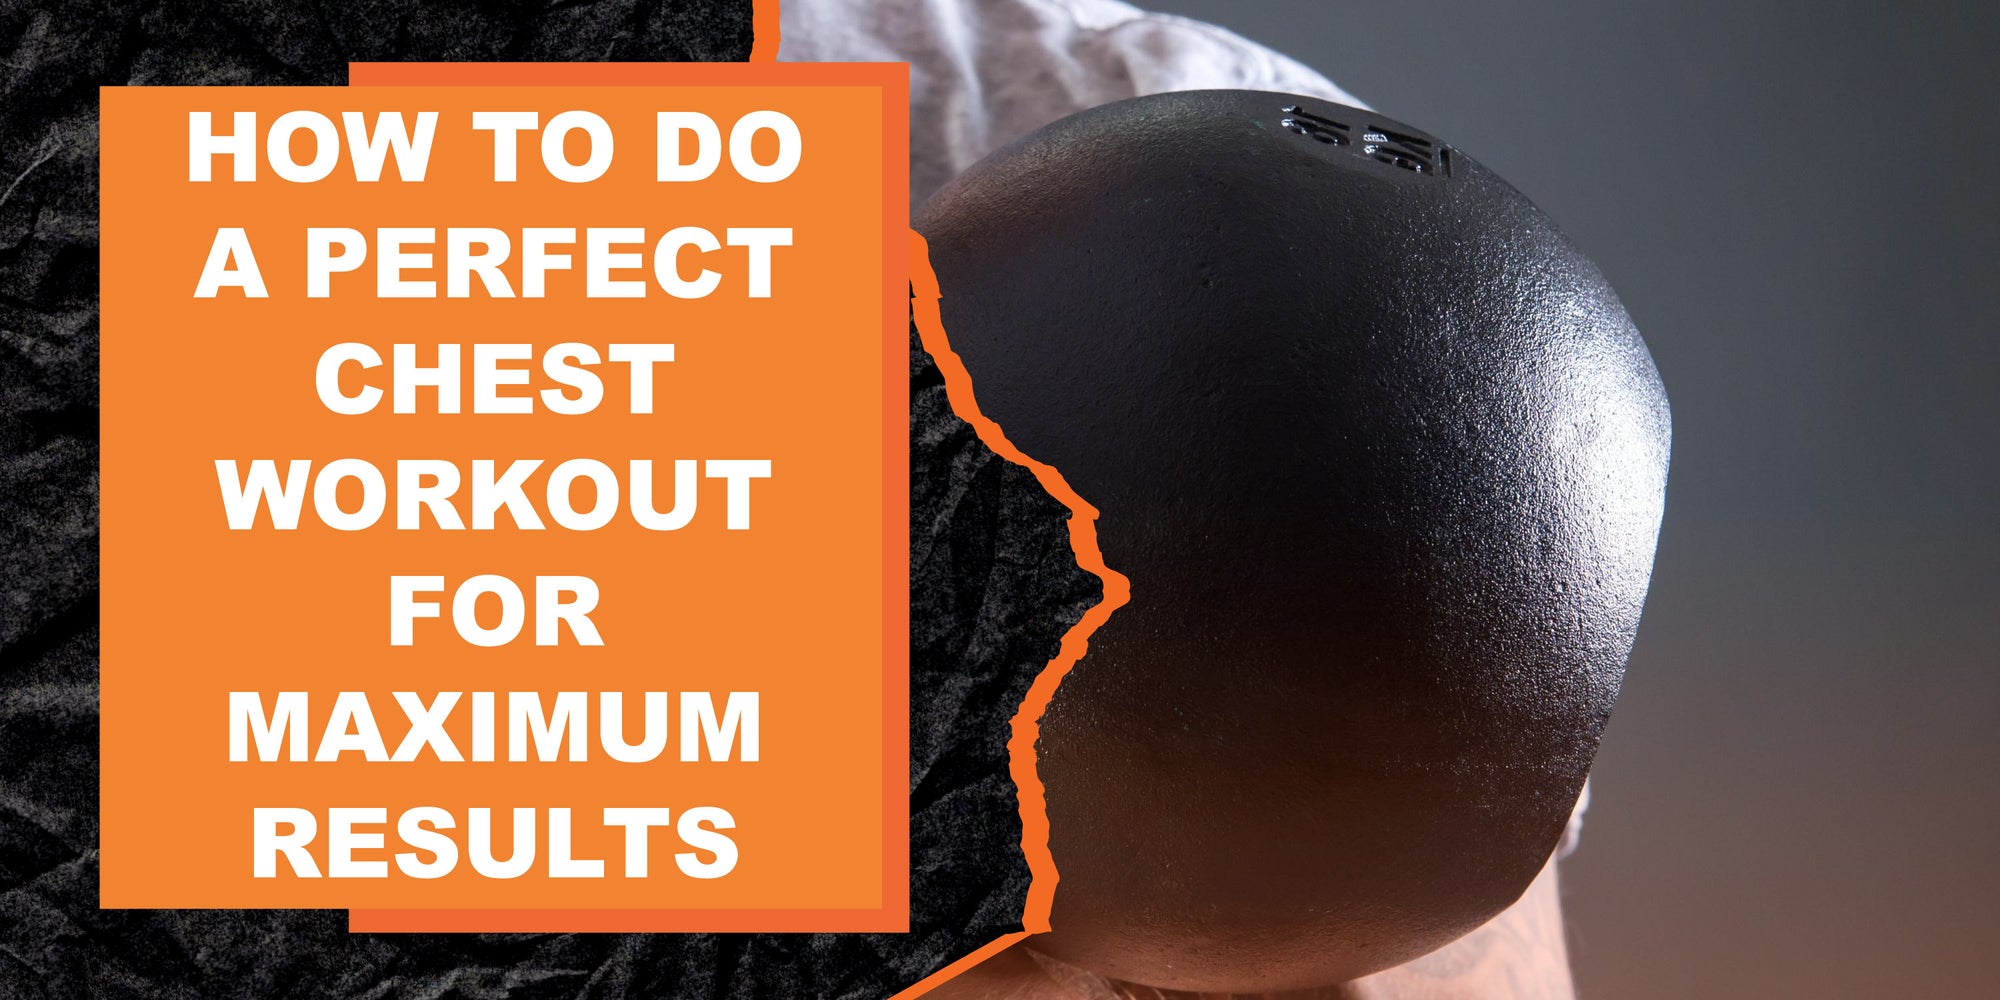 How to Do a Perfect Chest Workout for Maximum Results